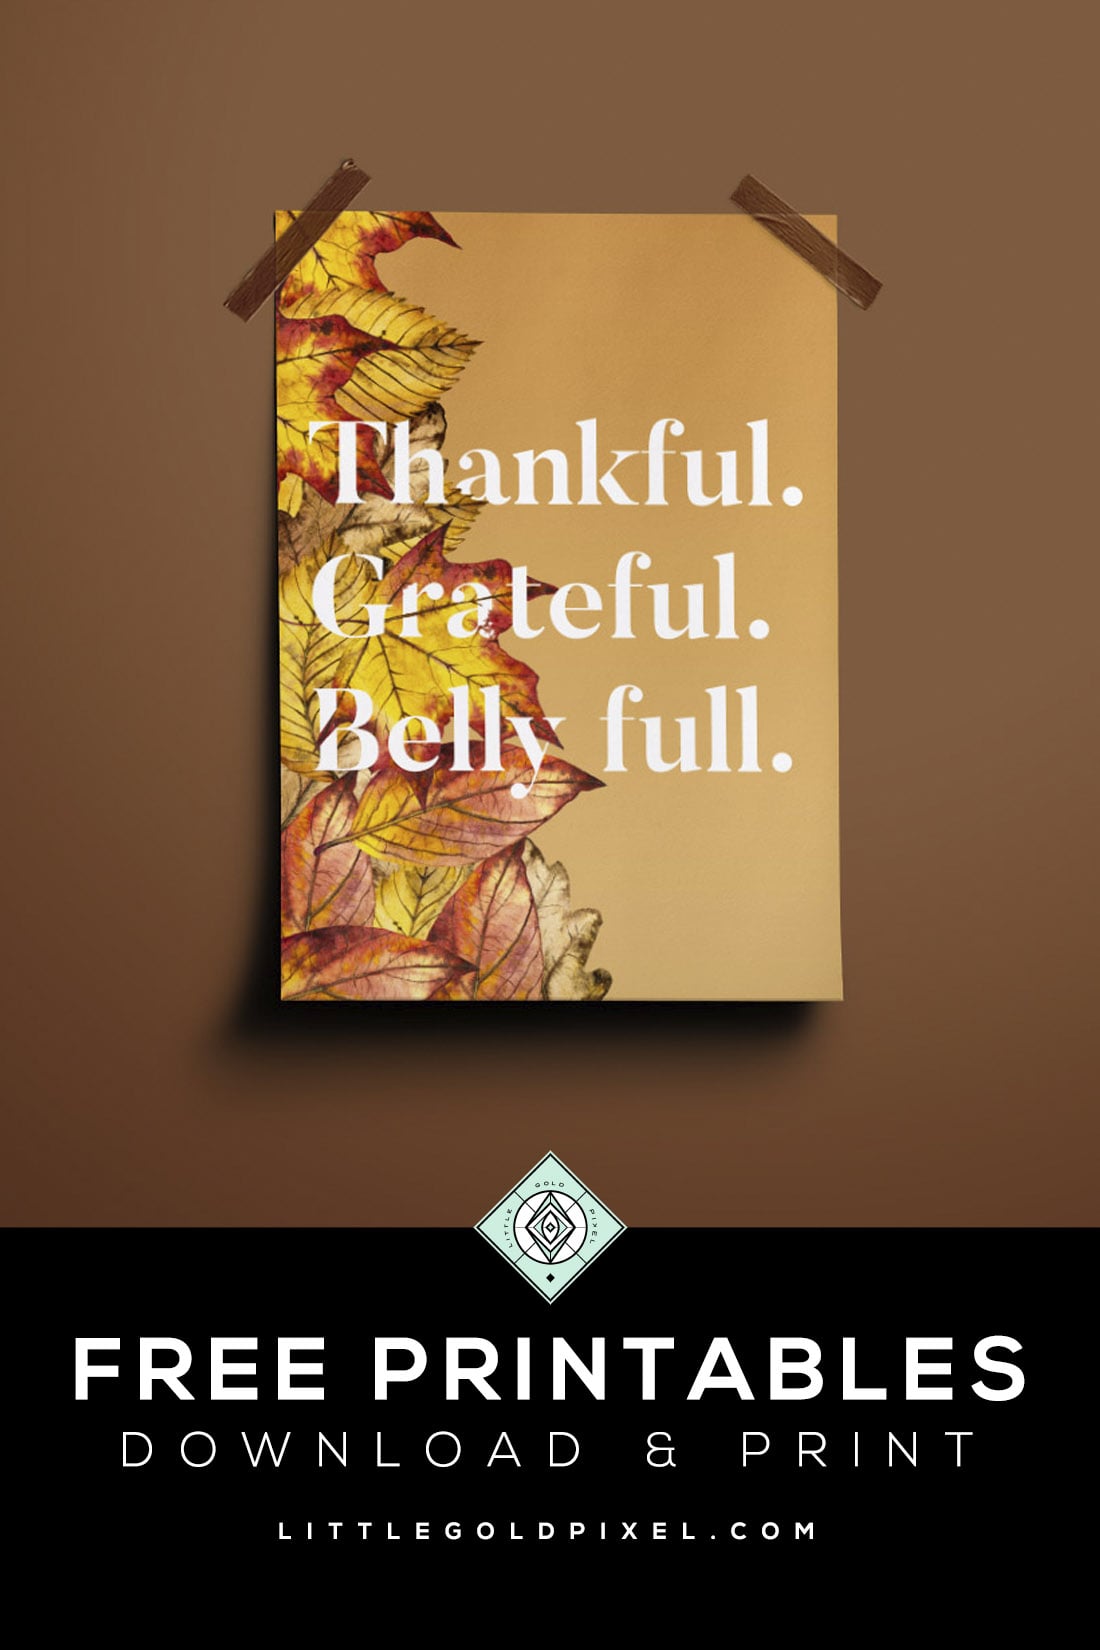 Thankful Free Printable • Thanksgiving Holiday Download • Little Gold Pixel • In which I share a Thankful free printable to help you decorate for your Thanksgiving celebration this year. Download, print and hang today! • #thanksgiving #freebie #freeprintable #freebiefriday #holidayprintable #thankful